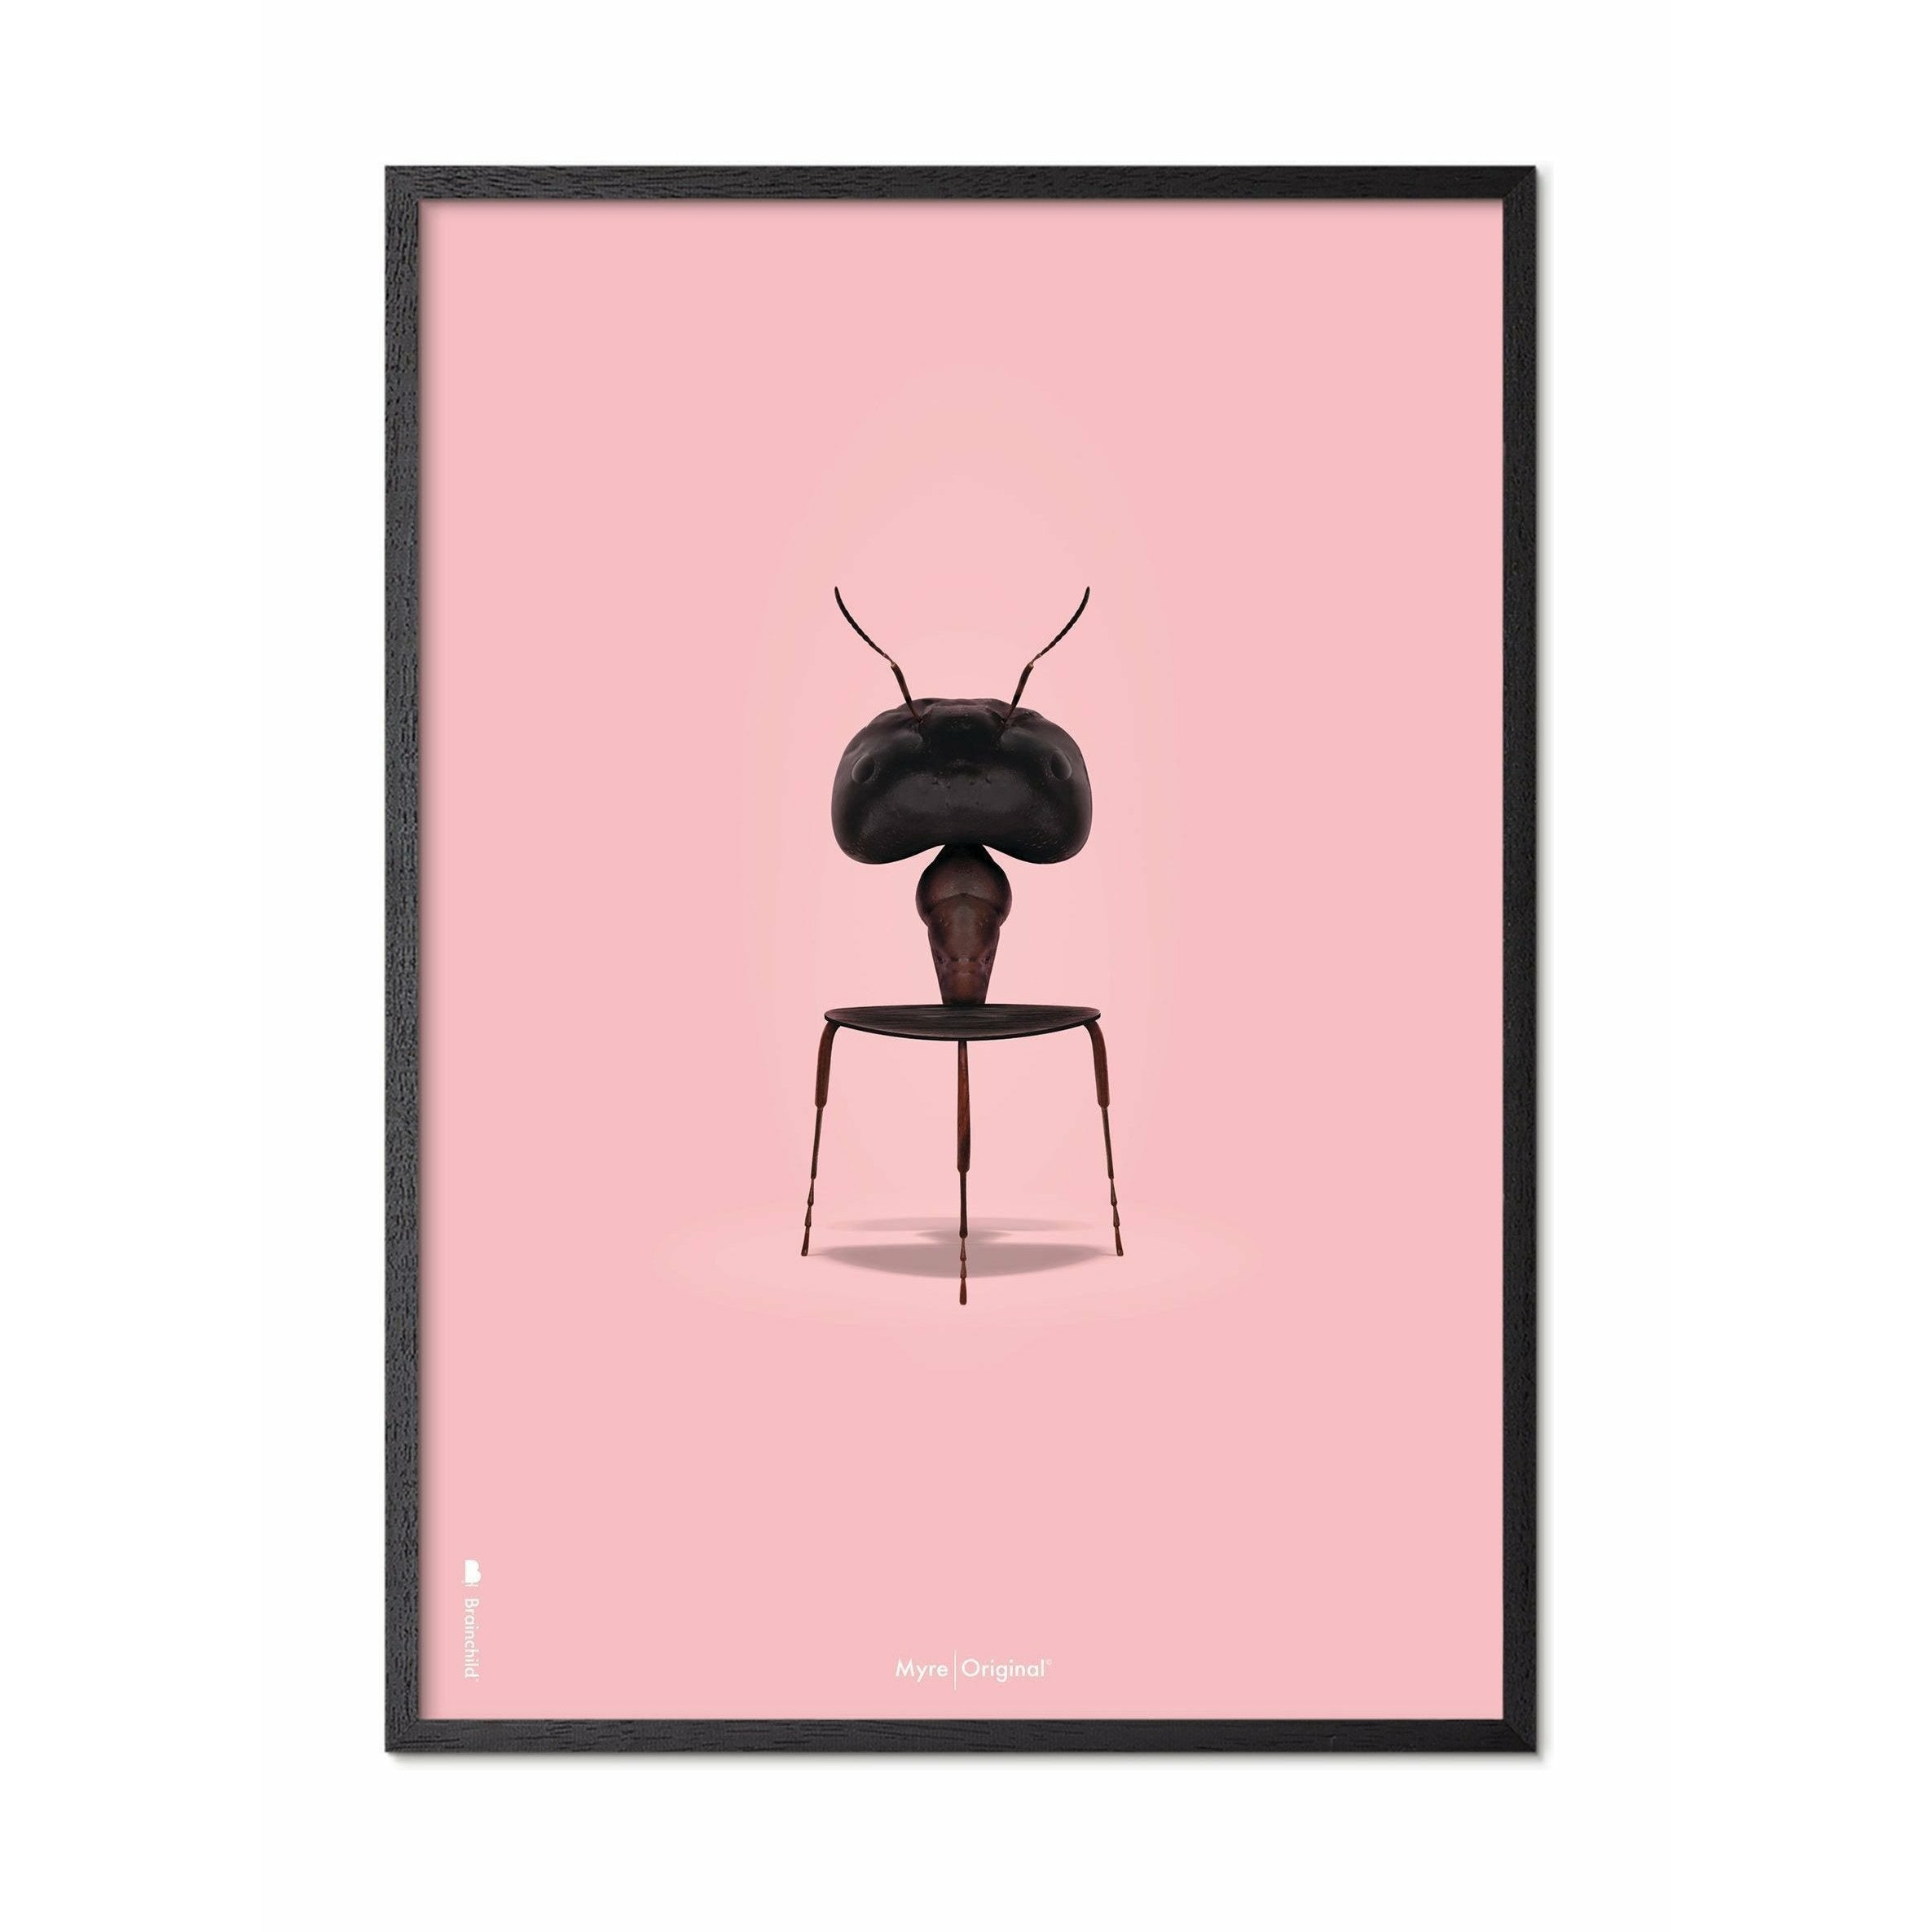 Brainchild Ant Classic Poster, Frame In Black Lacquered Wood 30x40 Cm, Pink Background